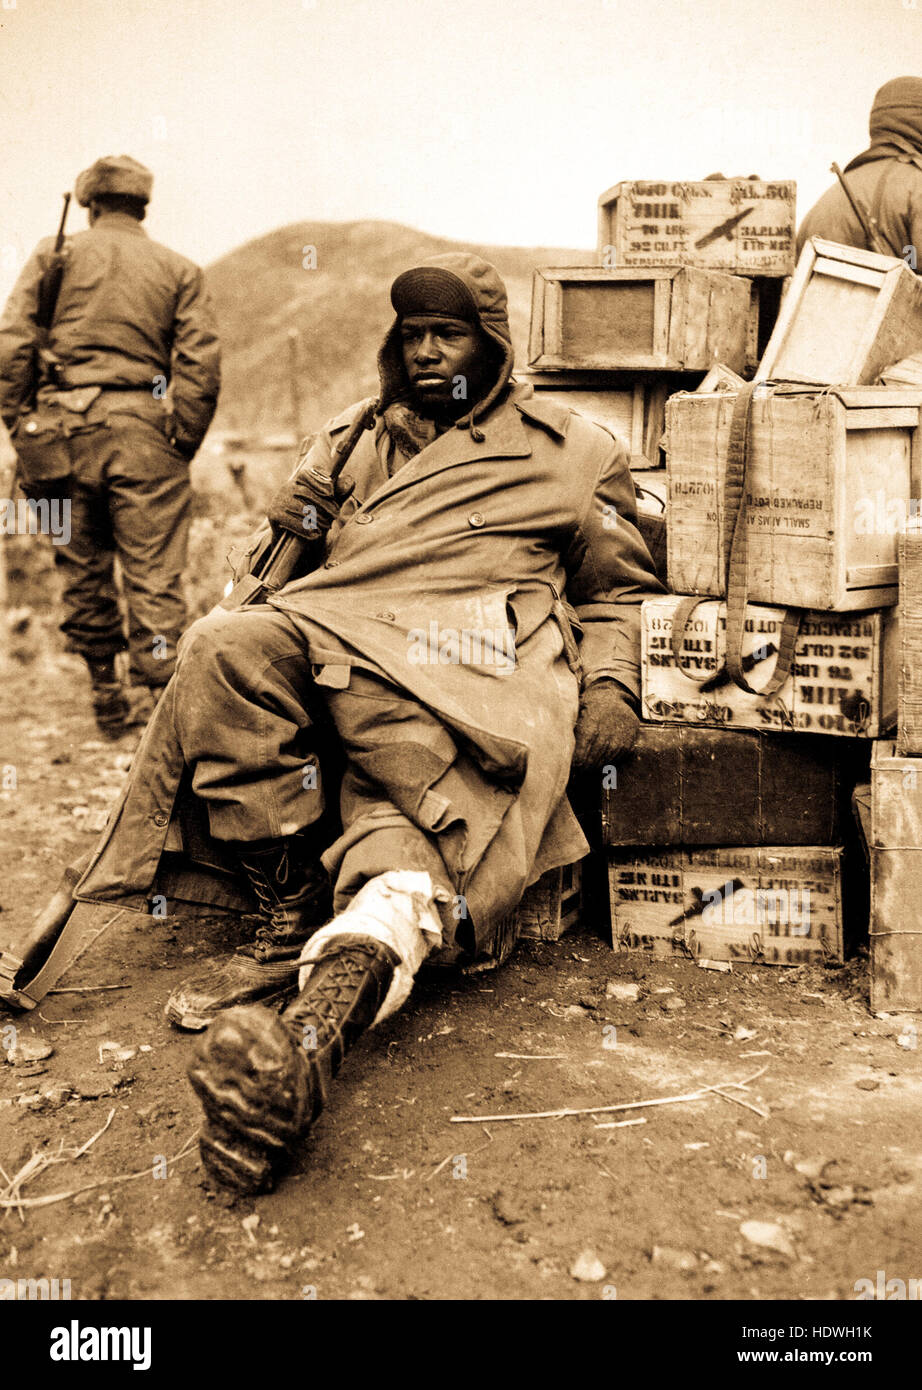 Pfc. Edward Wilson, 24th Infantry Regiment, wounded in leg while engaged in action against the enemy forces near the front lines in Korea, waits to be evacuated to aid station behind the lines.  February 16, 1951. Photo by Pfc. Charles Fabiszak. Stock Photo